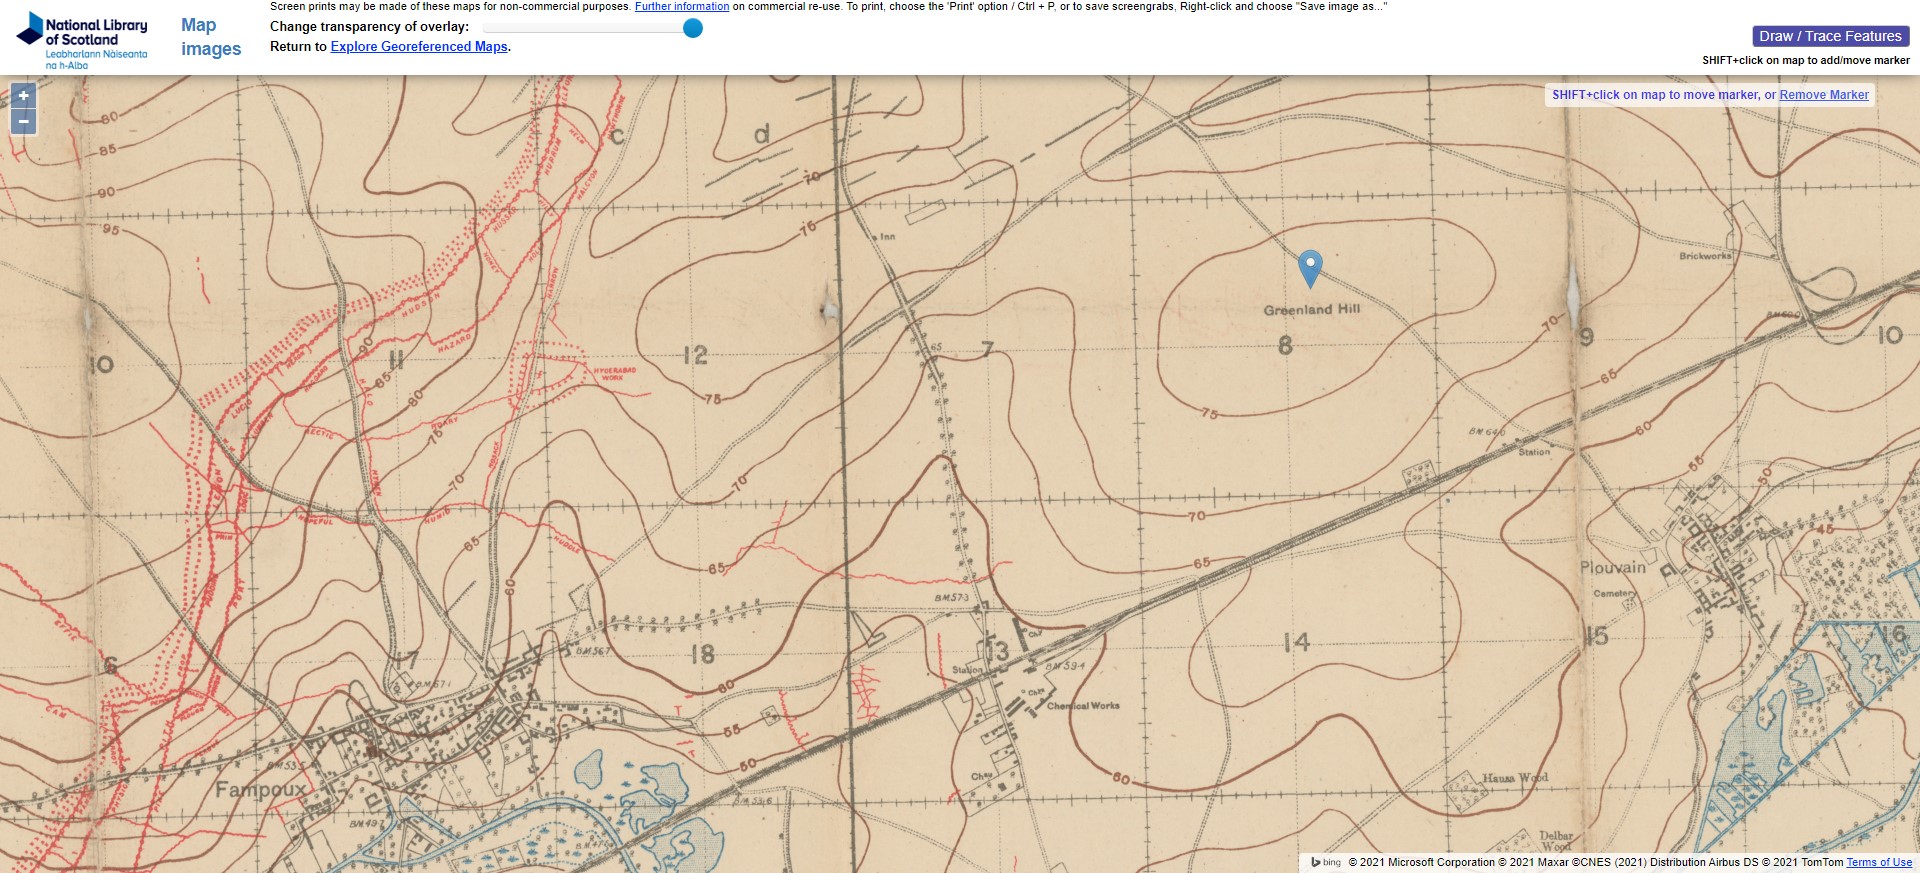 NLS WWI Trench Map Greenland Hill